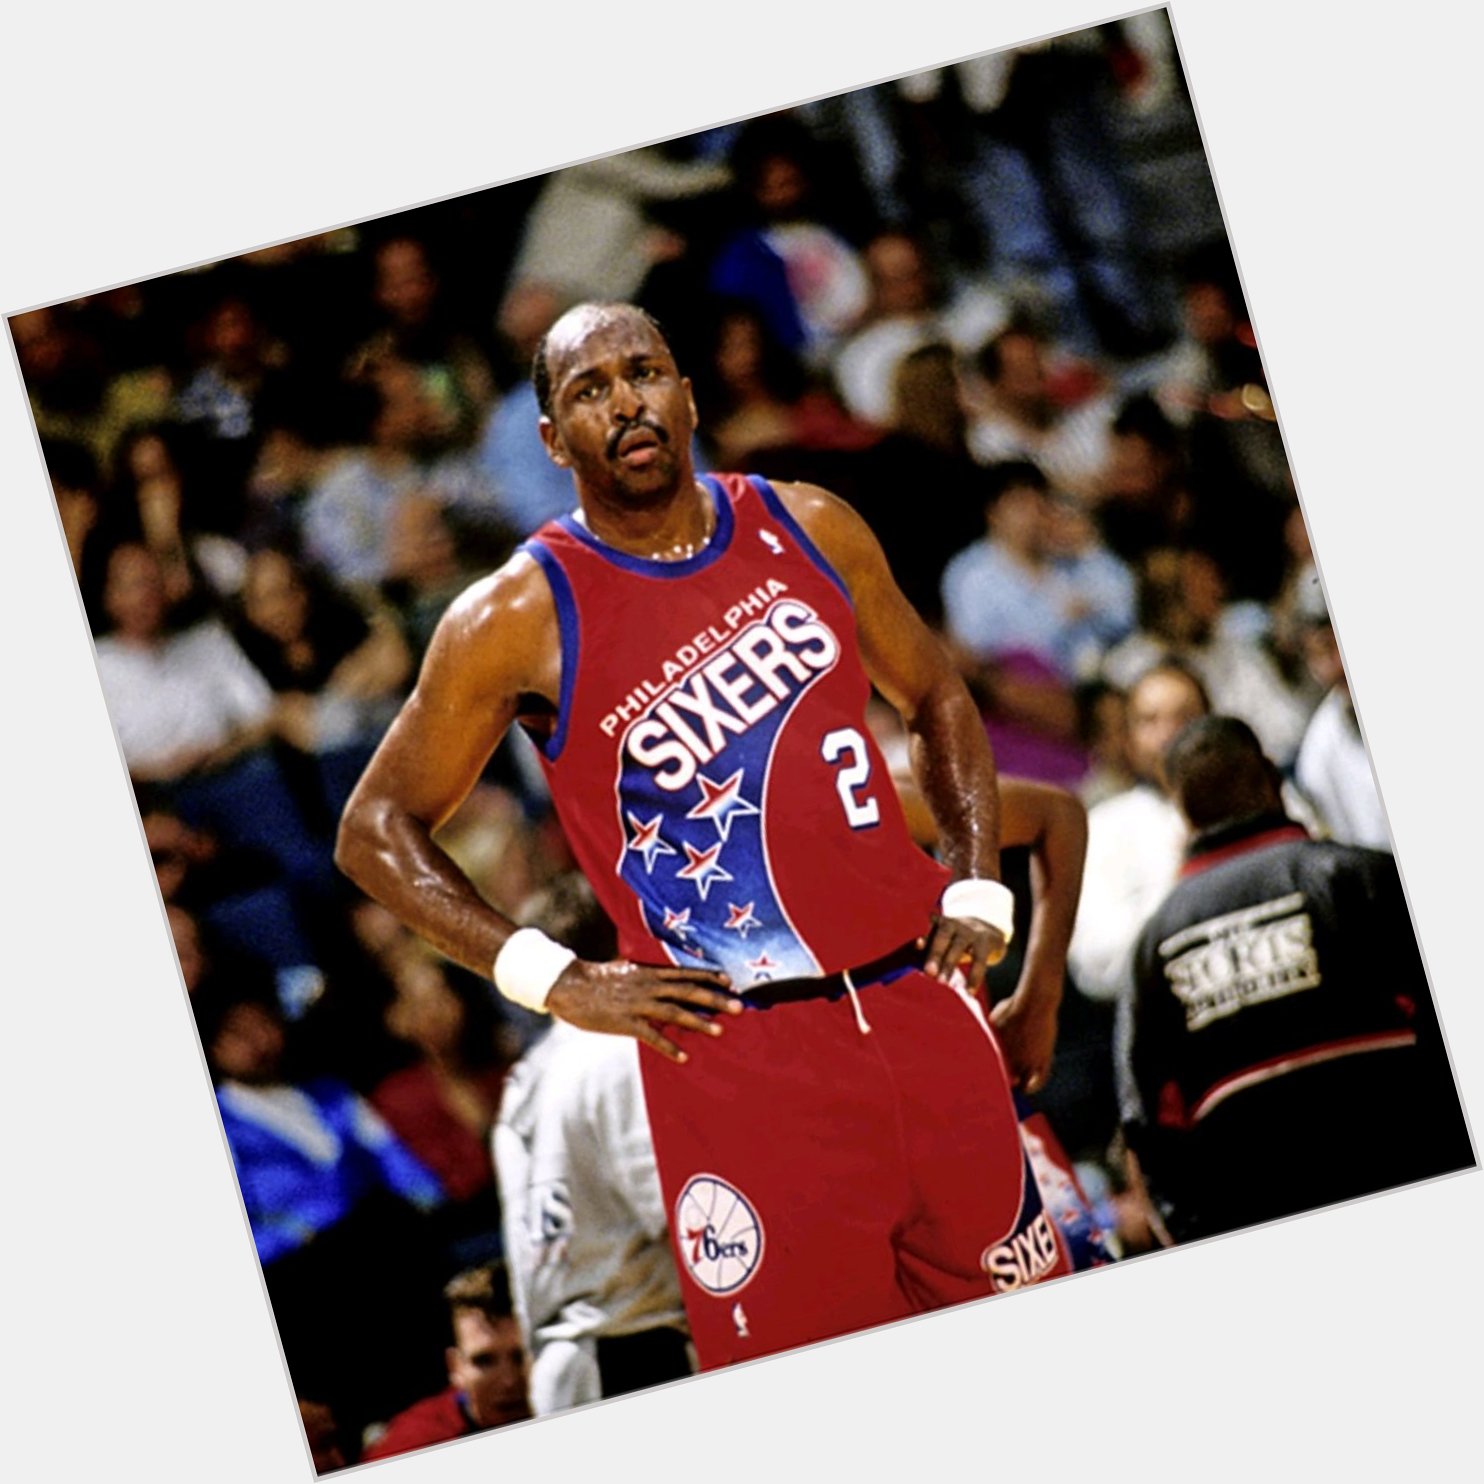 HAPPY BIRTHDAY MOSES MALONE MARCH 23RD 1955 